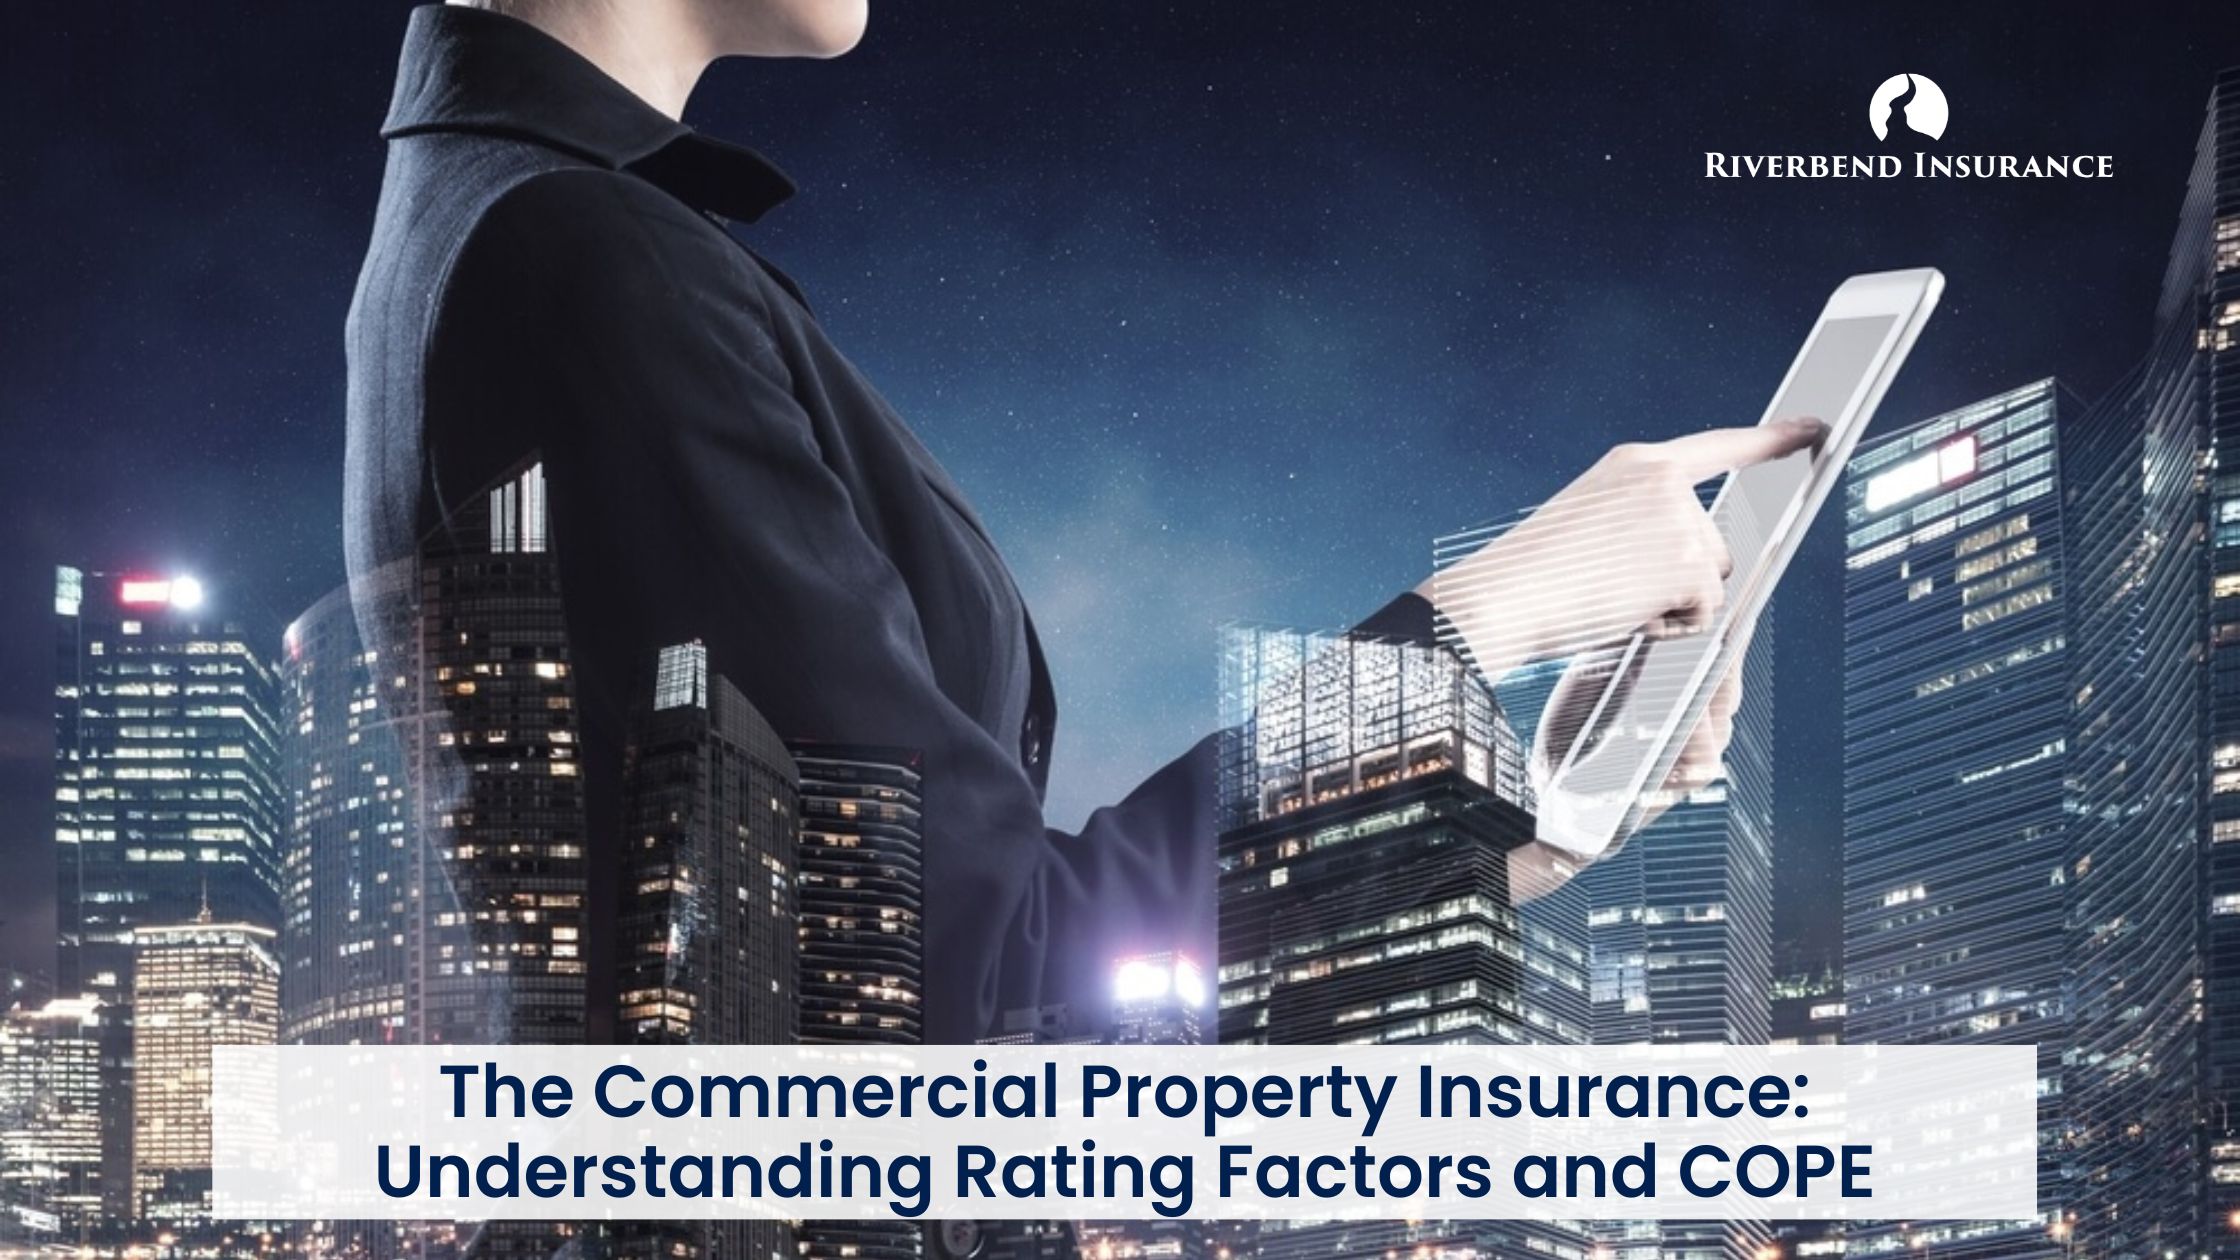 The Commercial Property Insurance: Understanding Rating Factors and COPE